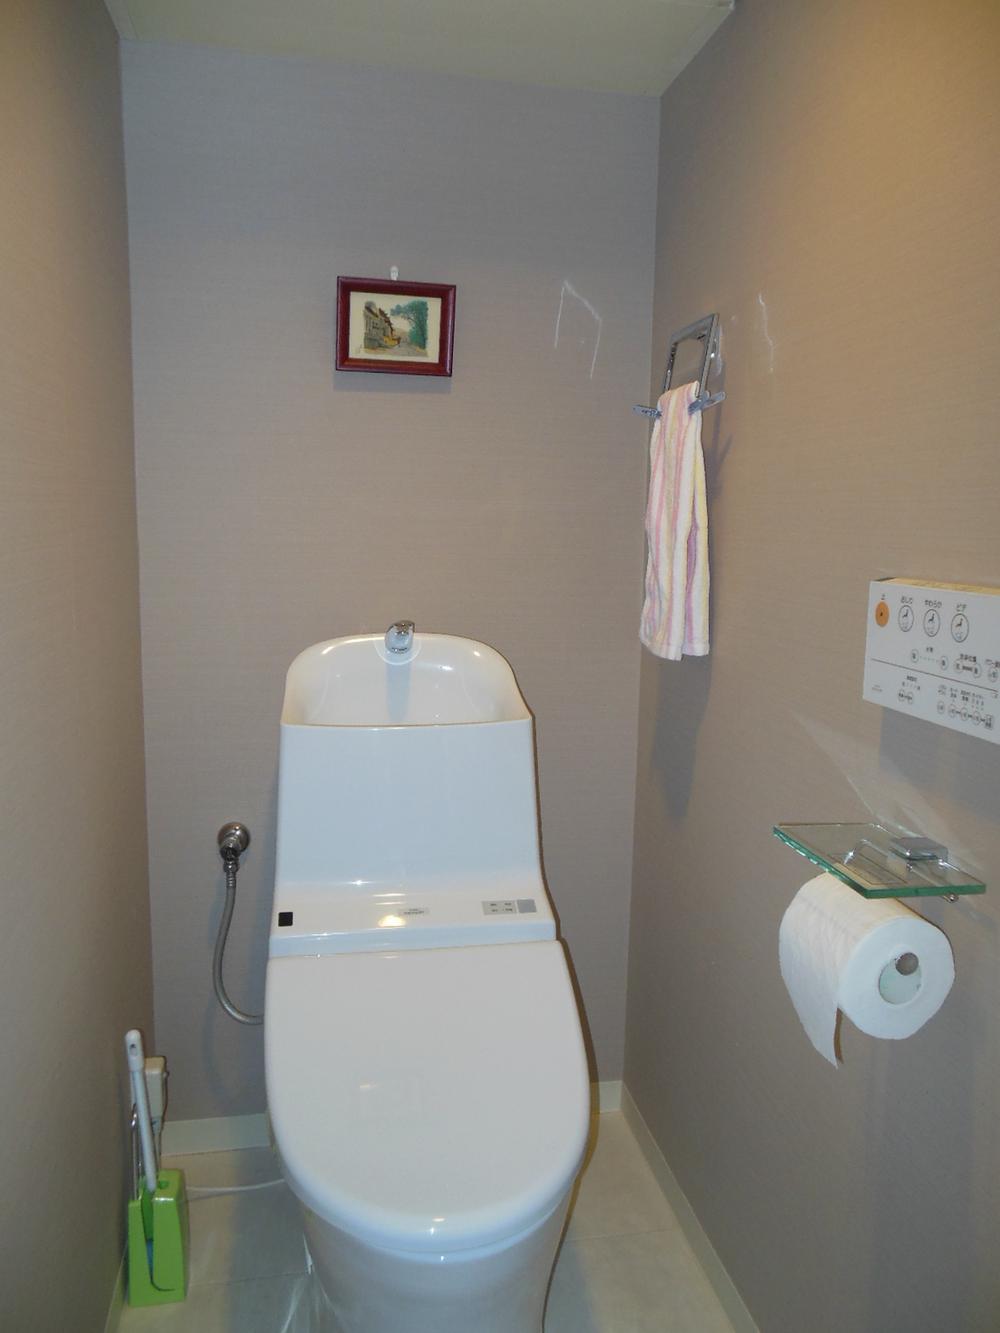 Toilet. Warm cleaning function with toilet seat